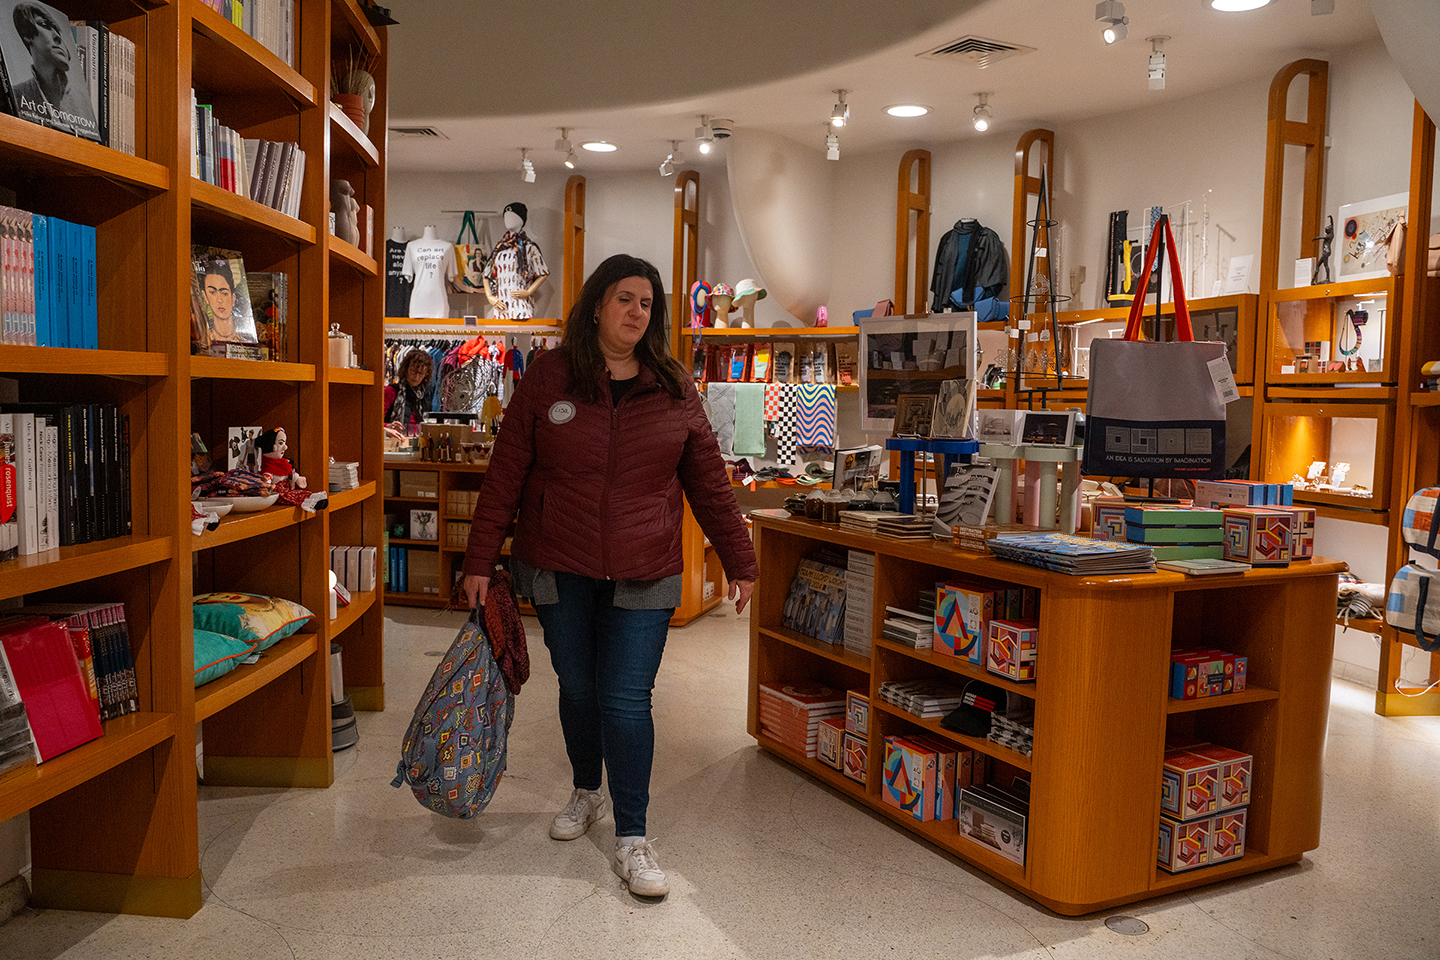 A woman walks through the aisle of the gift shop